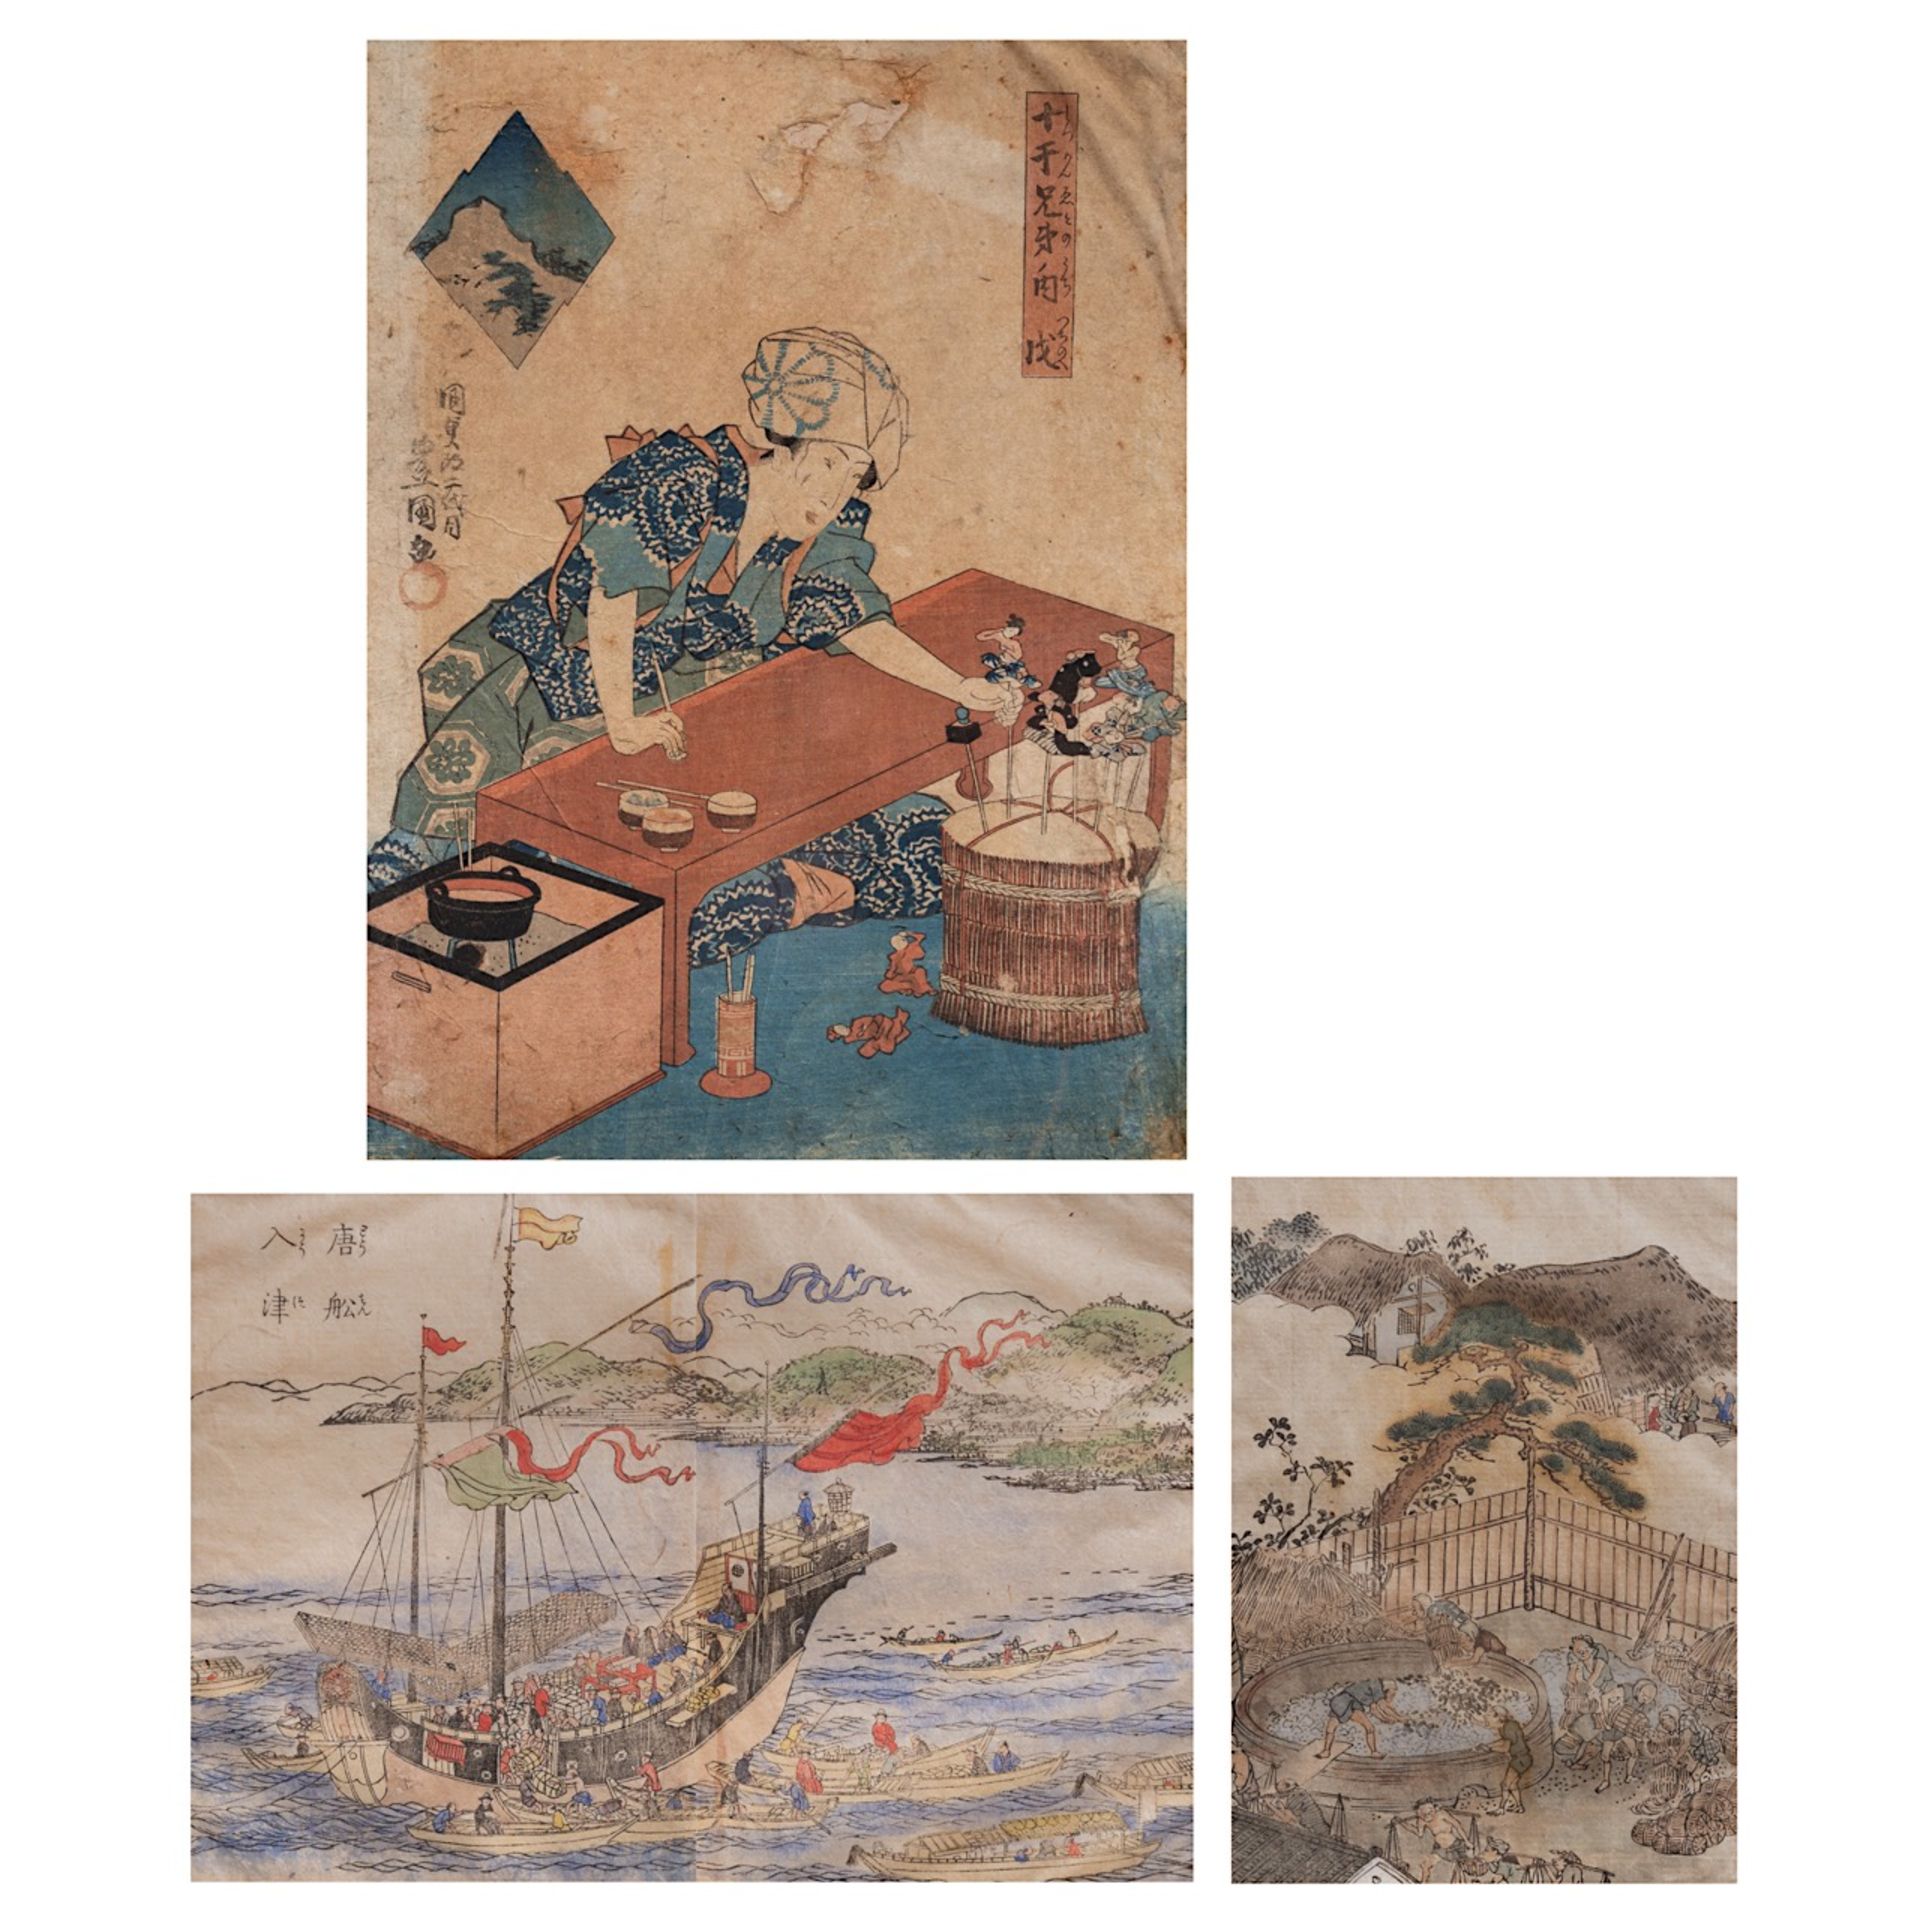 A collection of three Japanese Edo period (1603-1868) prints, one by Kunisada, framed 49,5 x 42,5 (t